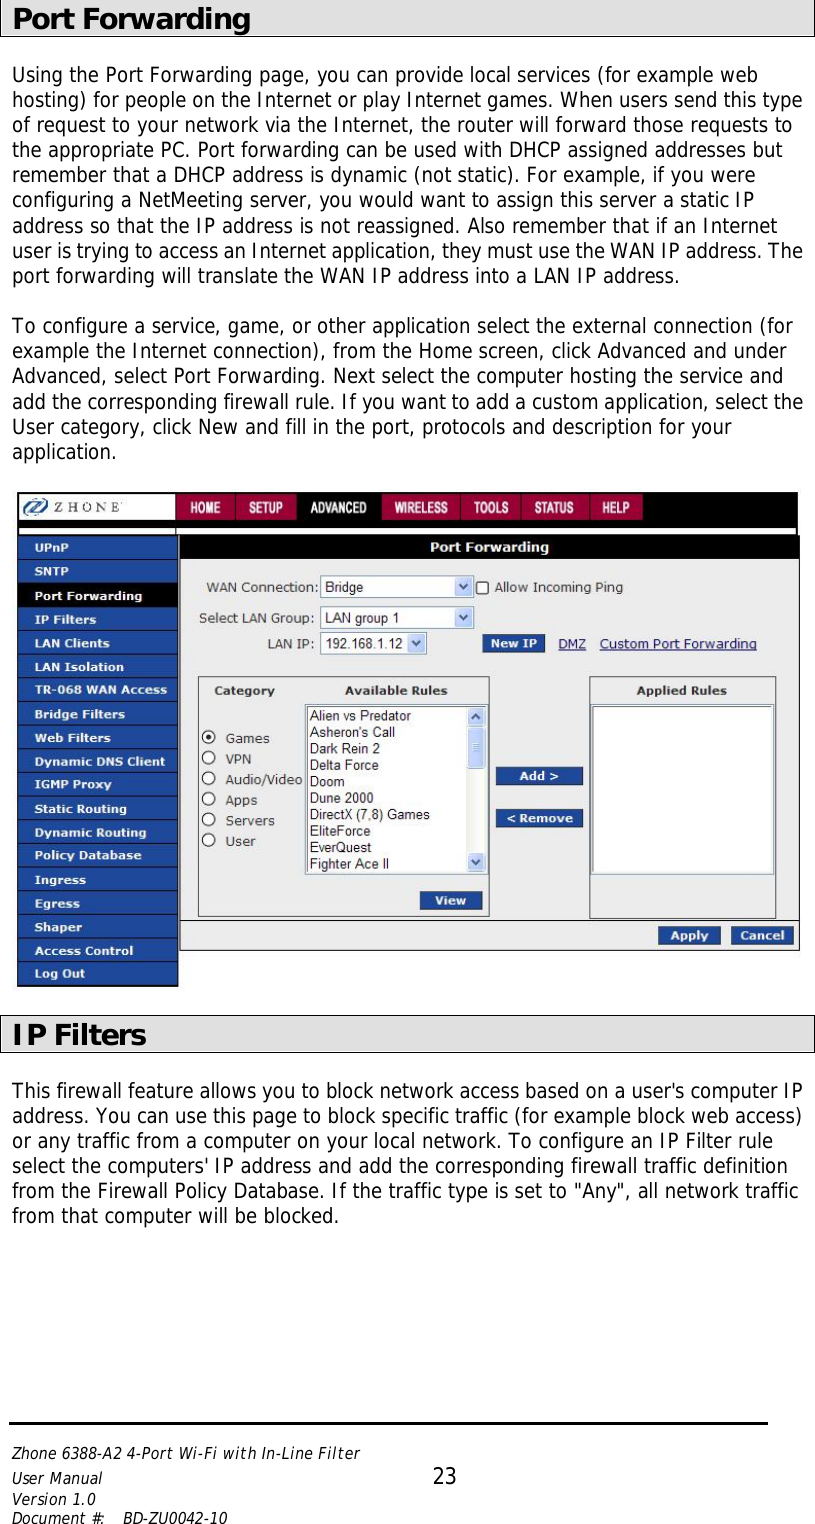   Zhone 6388-A2 4-Port Wi-Fi with In-Line Filter User Manual 23 Version 1.0 Document #:  BD-ZU0042-10   Port Forwarding  Using the Port Forwarding page, you can provide local services (for example web hosting) for people on the Internet or play Internet games. When users send this type of request to your network via the Internet, the router will forward those requests to the appropriate PC. Port forwarding can be used with DHCP assigned addresses but remember that a DHCP address is dynamic (not static). For example, if you were configuring a NetMeeting server, you would want to assign this server a static IP address so that the IP address is not reassigned. Also remember that if an Internet user is trying to access an Internet application, they must use the WAN IP address. The port forwarding will translate the WAN IP address into a LAN IP address.  To configure a service, game, or other application select the external connection (for example the Internet connection), from the Home screen, click Advanced and under Advanced, select Port Forwarding. Next select the computer hosting the service and add the corresponding firewall rule. If you want to add a custom application, select the User category, click New and fill in the port, protocols and description for your application.    IP Filters  This firewall feature allows you to block network access based on a user&apos;s computer IP address. You can use this page to block specific traffic (for example block web access) or any traffic from a computer on your local network. To configure an IP Filter rule select the computers&apos; IP address and add the corresponding firewall traffic definition from the Firewall Policy Database. If the traffic type is set to &quot;Any&quot;, all network traffic from that computer will be blocked.  